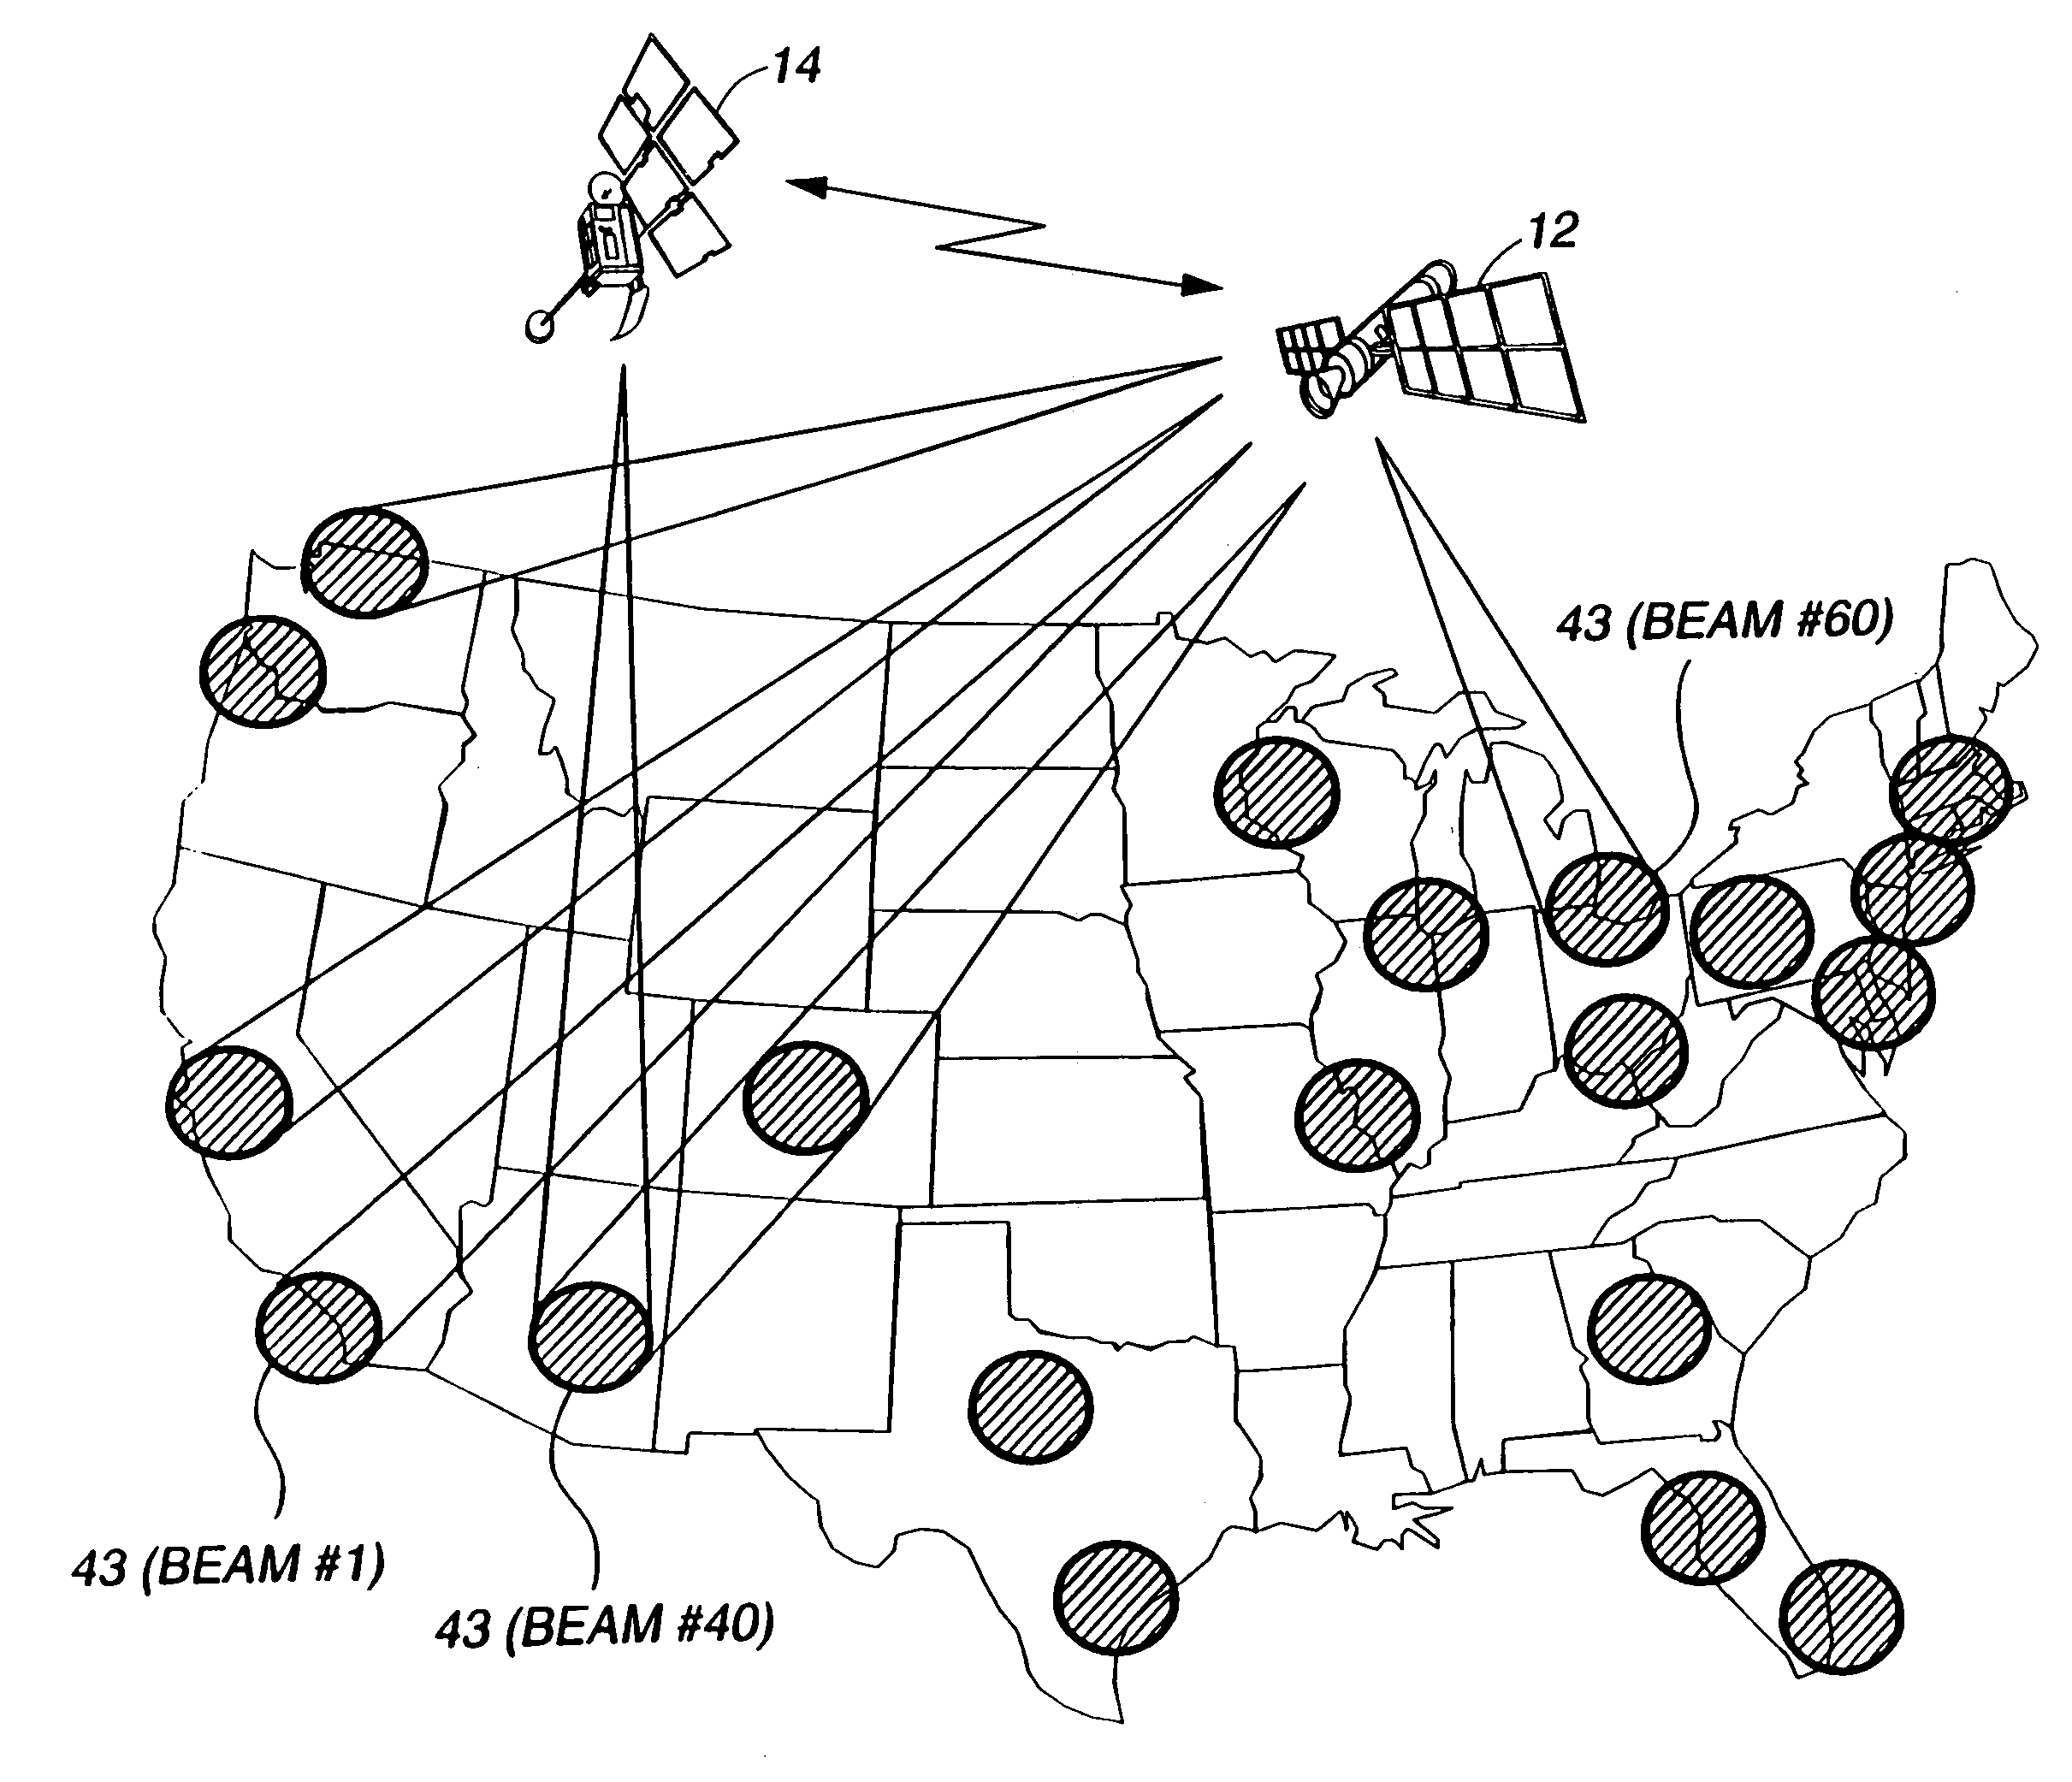 Communications system using a satellite-based network with a plurality of spot beams providing ubiquitous coverage from two different satellites